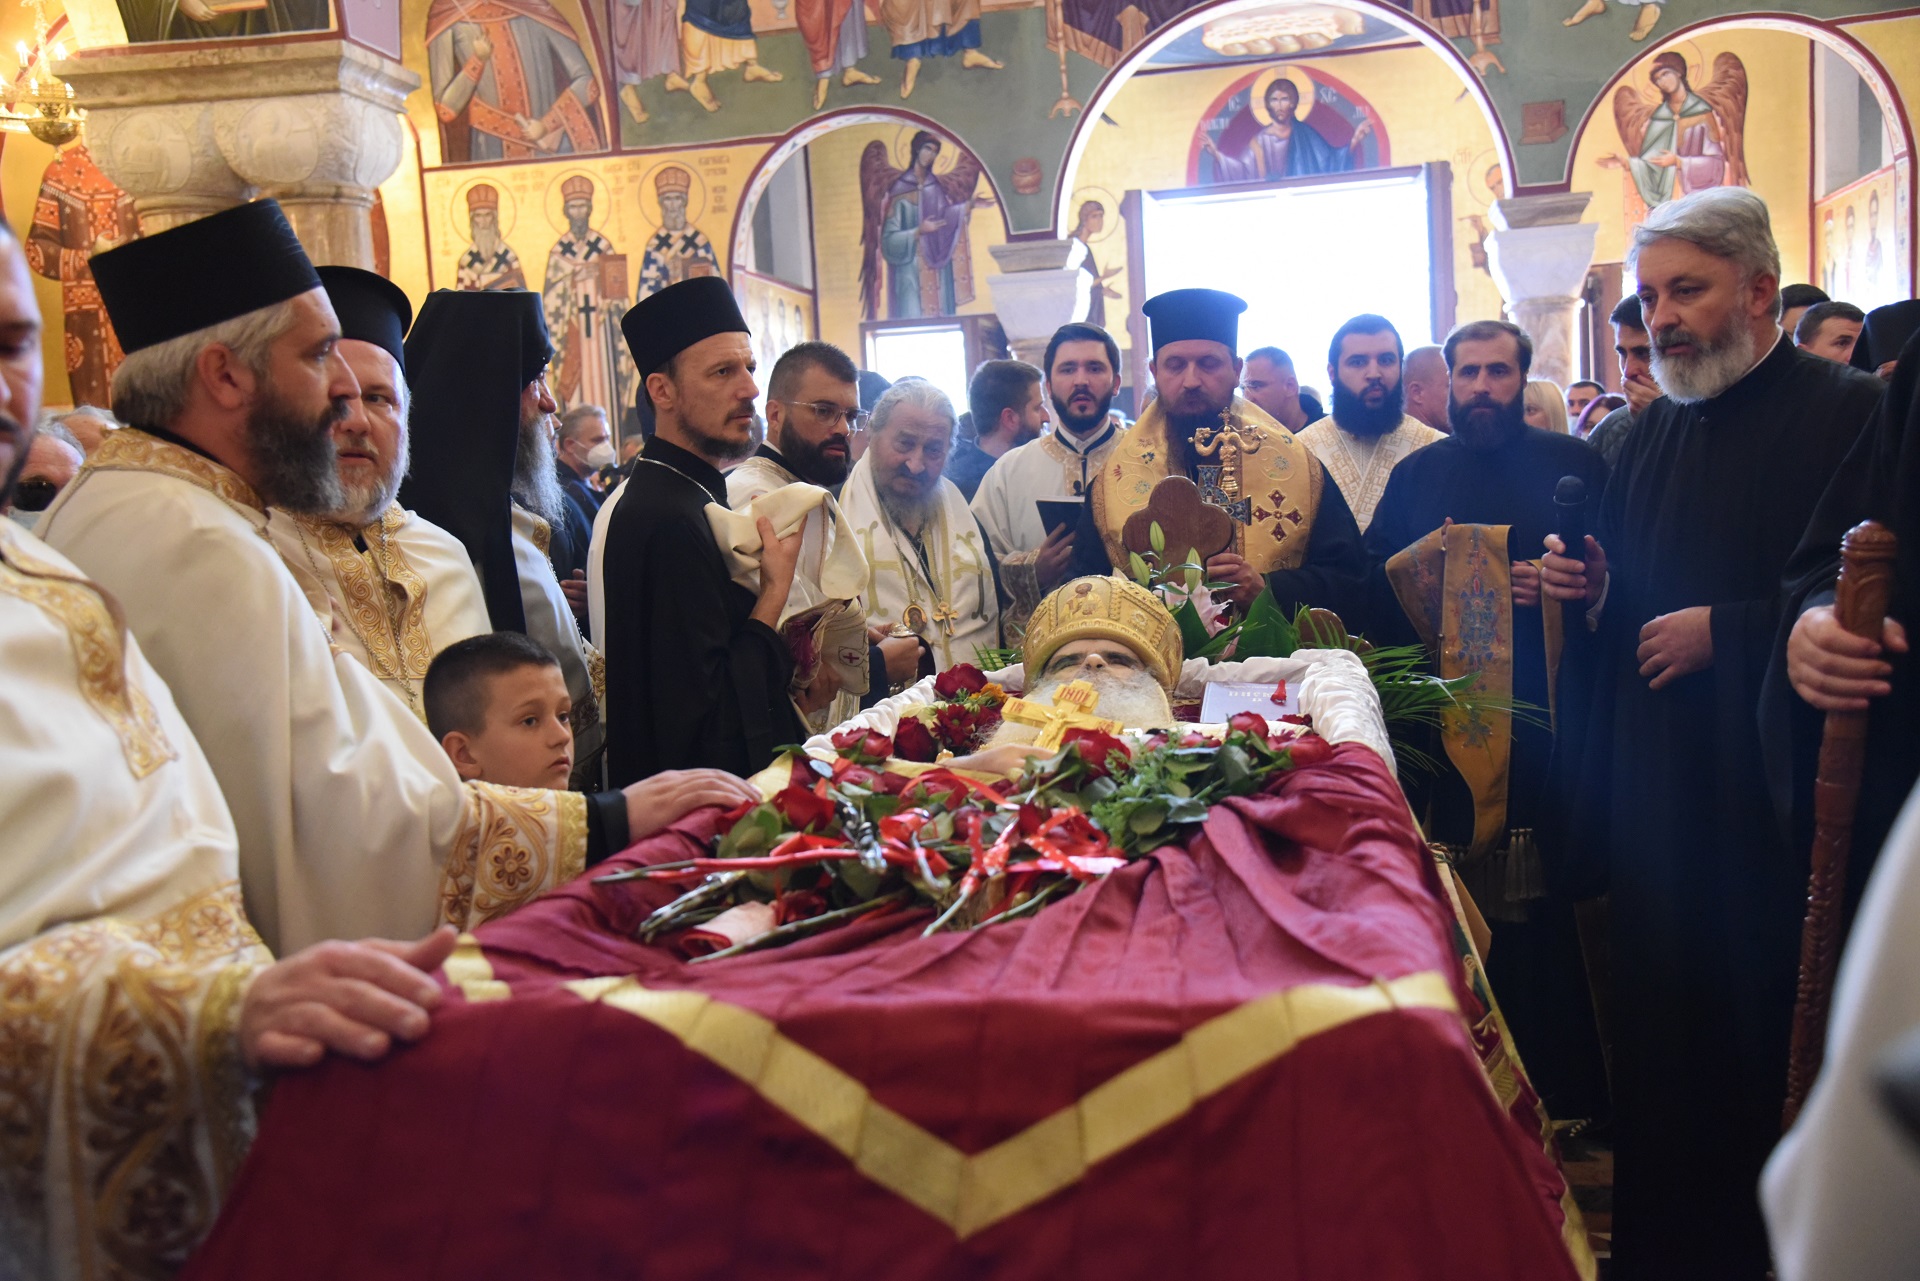 epa08789318 Orthodox priests hold a service by the coffin of Serbian Orthodox Church Metropolitan bishop of Montenegro, Metropolitan Amfilohije (Radovic) in Podgorica, Montenegro, 31 October 2020. Metropolitanate of Montenegro and the Littoral reported that Metropolitan Amfilohije died on 30 October 2020 in Podgorica, Montenegro at the age of 82. He had served in the top post in the Serbian Orthodox church for 30 years, a period in which former communist Yugoslavia shattered into separate states, including the Montenegro's breakaway from Serbia in 2006.  EPA/BORIS PEJOVIC